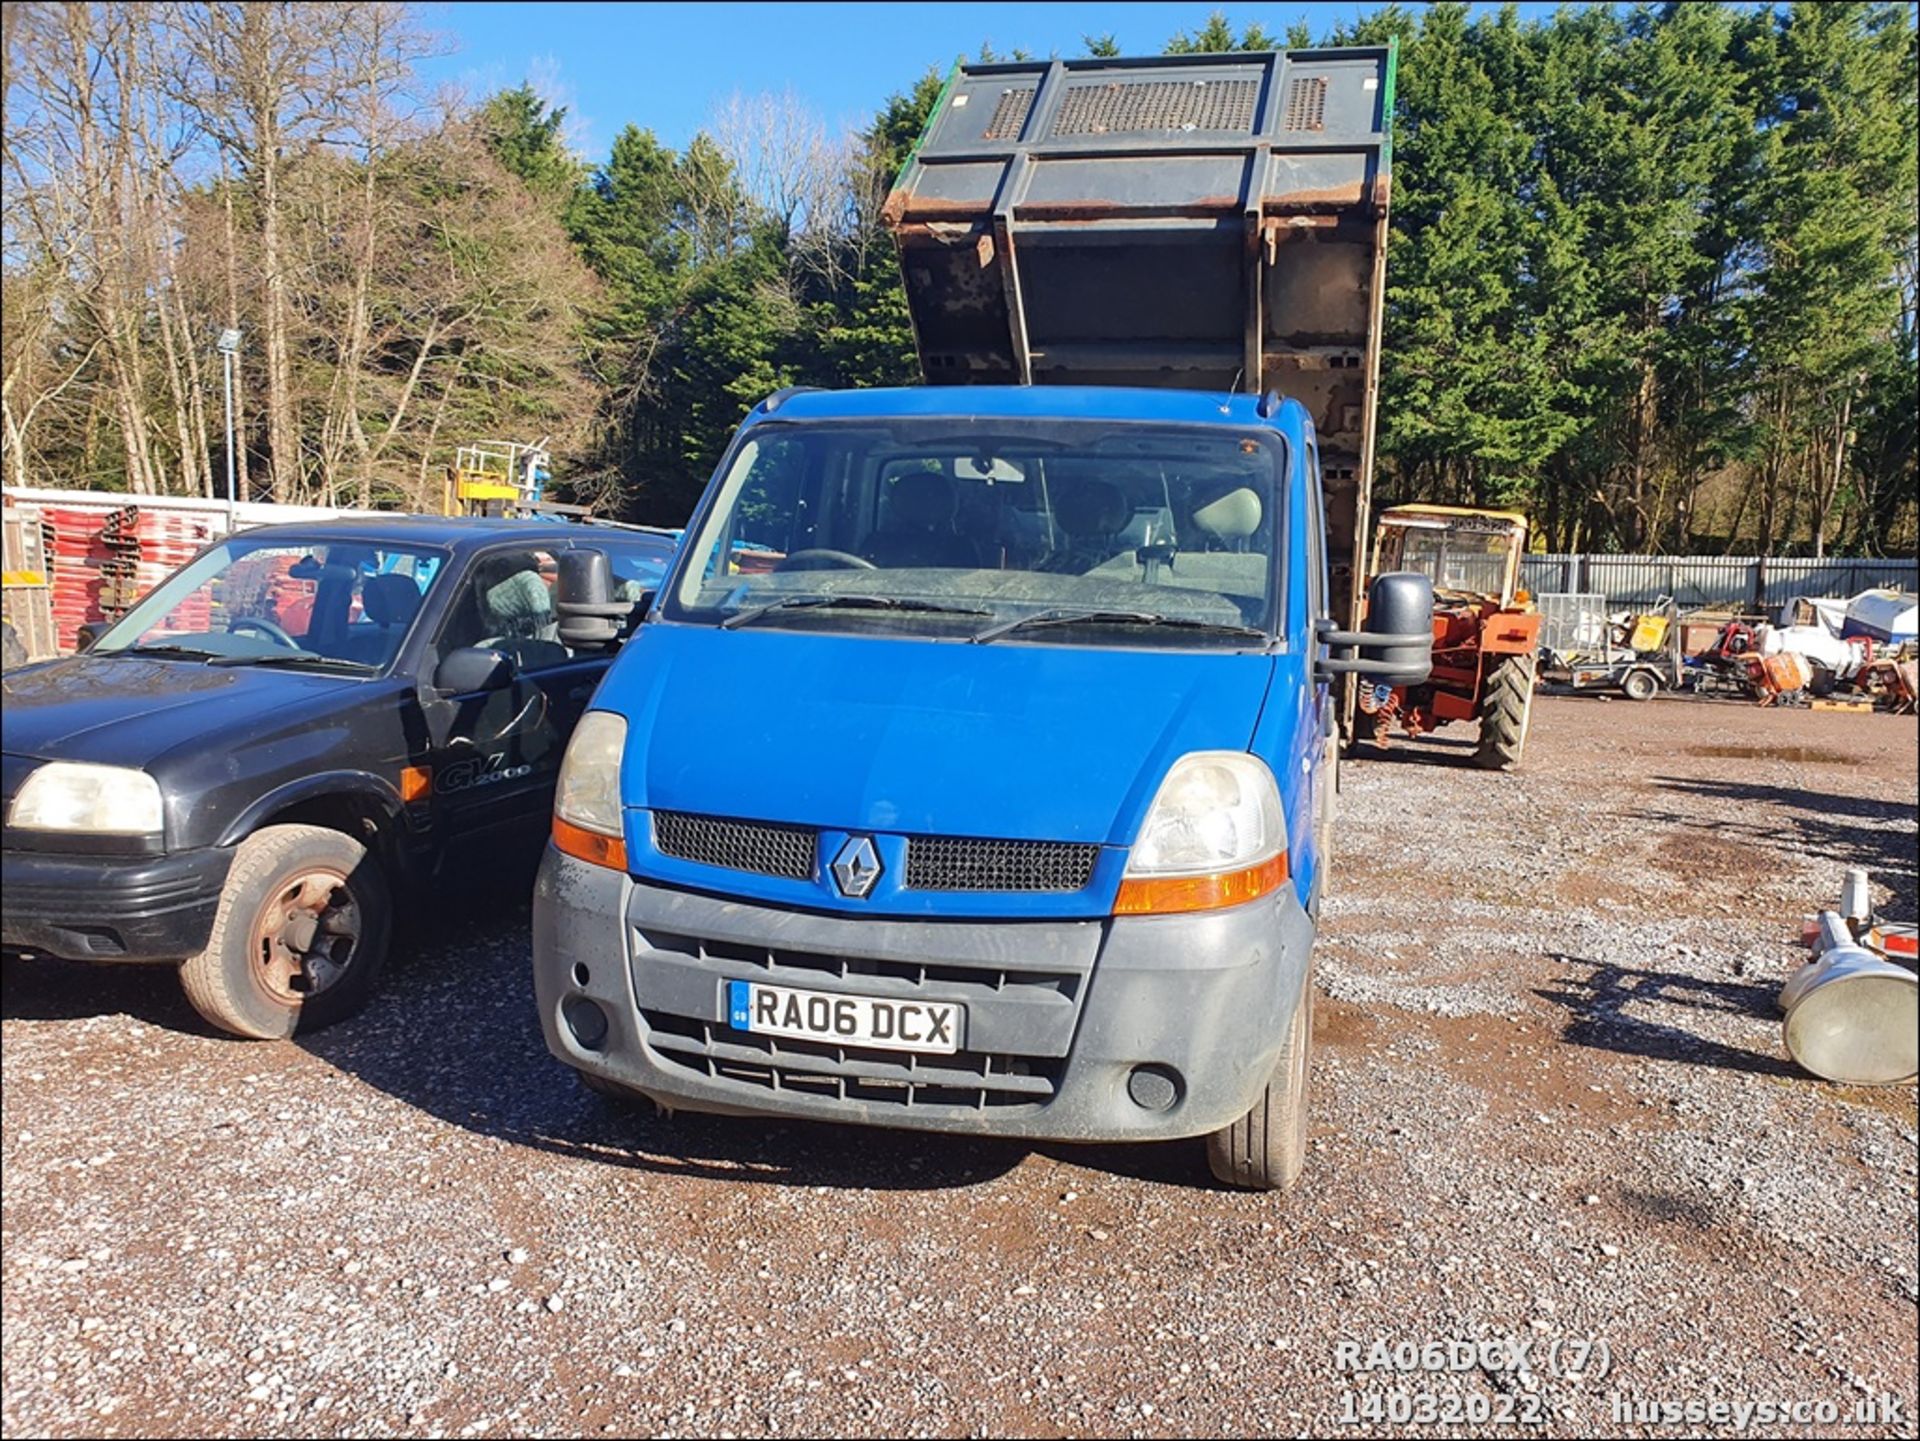 06/06 RENAULT MASTER CCML35 DCI 120 MWB - 2463cc 2dr Tipper (Grey) - Image 8 of 23